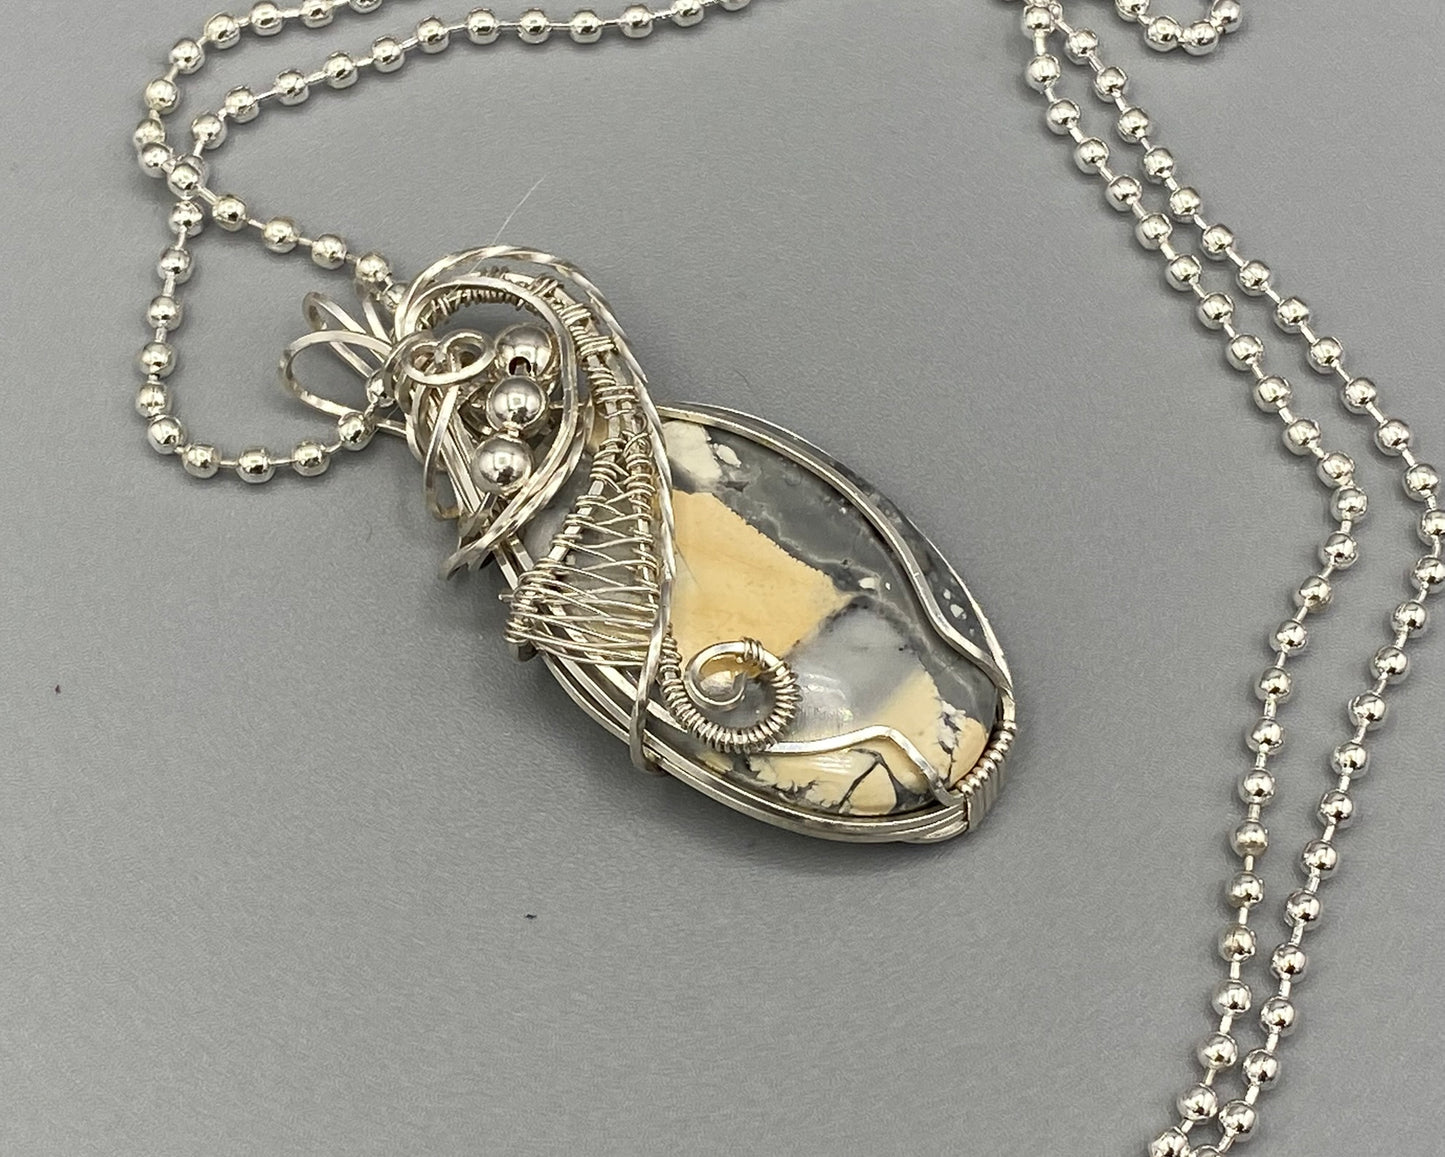 Oval Maligano Pendant Wire Wrapped in Argentium Silver